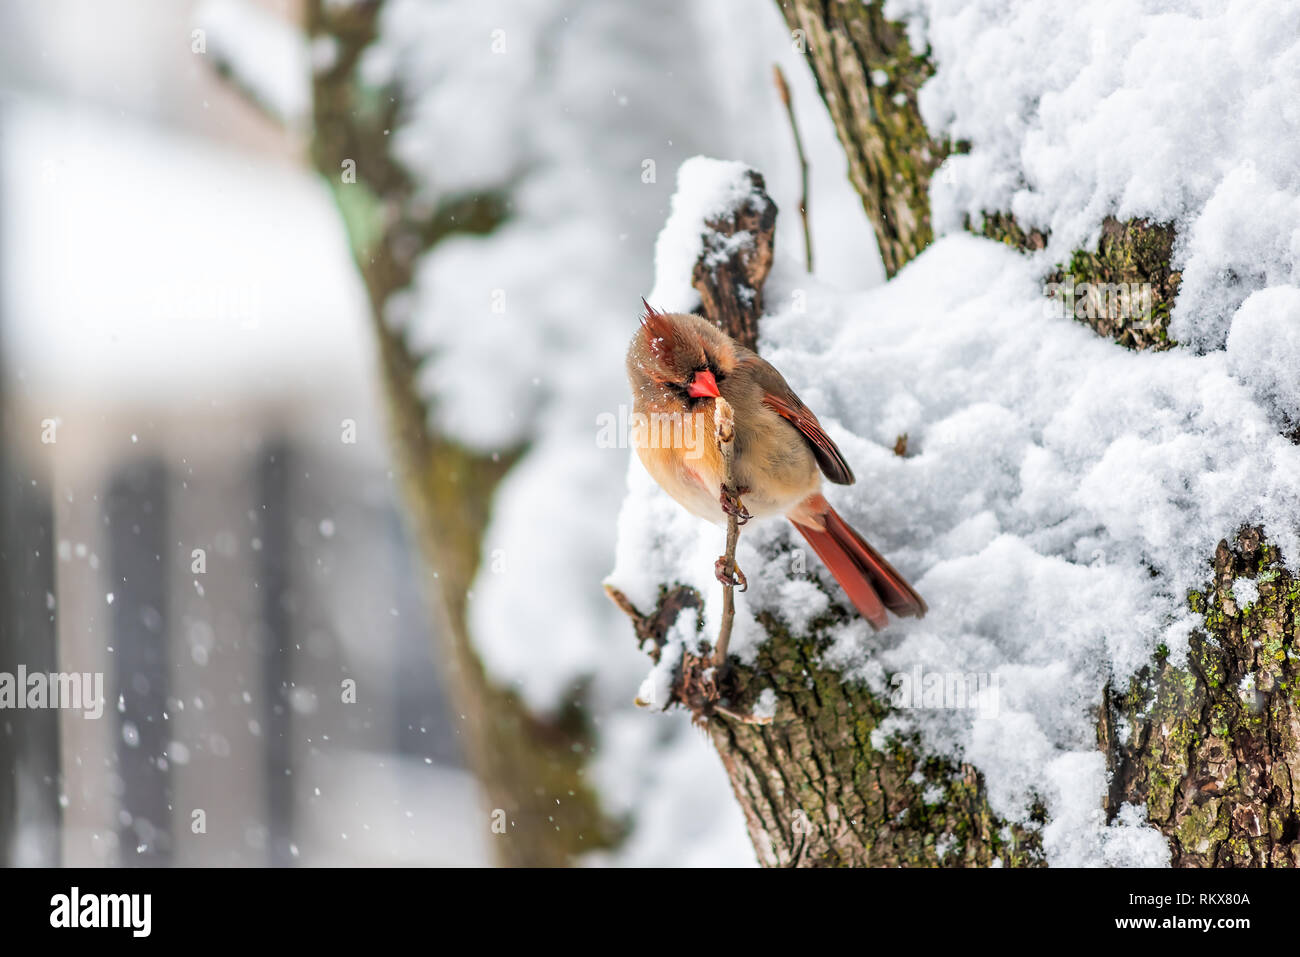 Puffed up female red northern cardinal Cardinalis bird sitting perched on tree branch with beak during winter in Virginia snow flakes falling Stock Photo